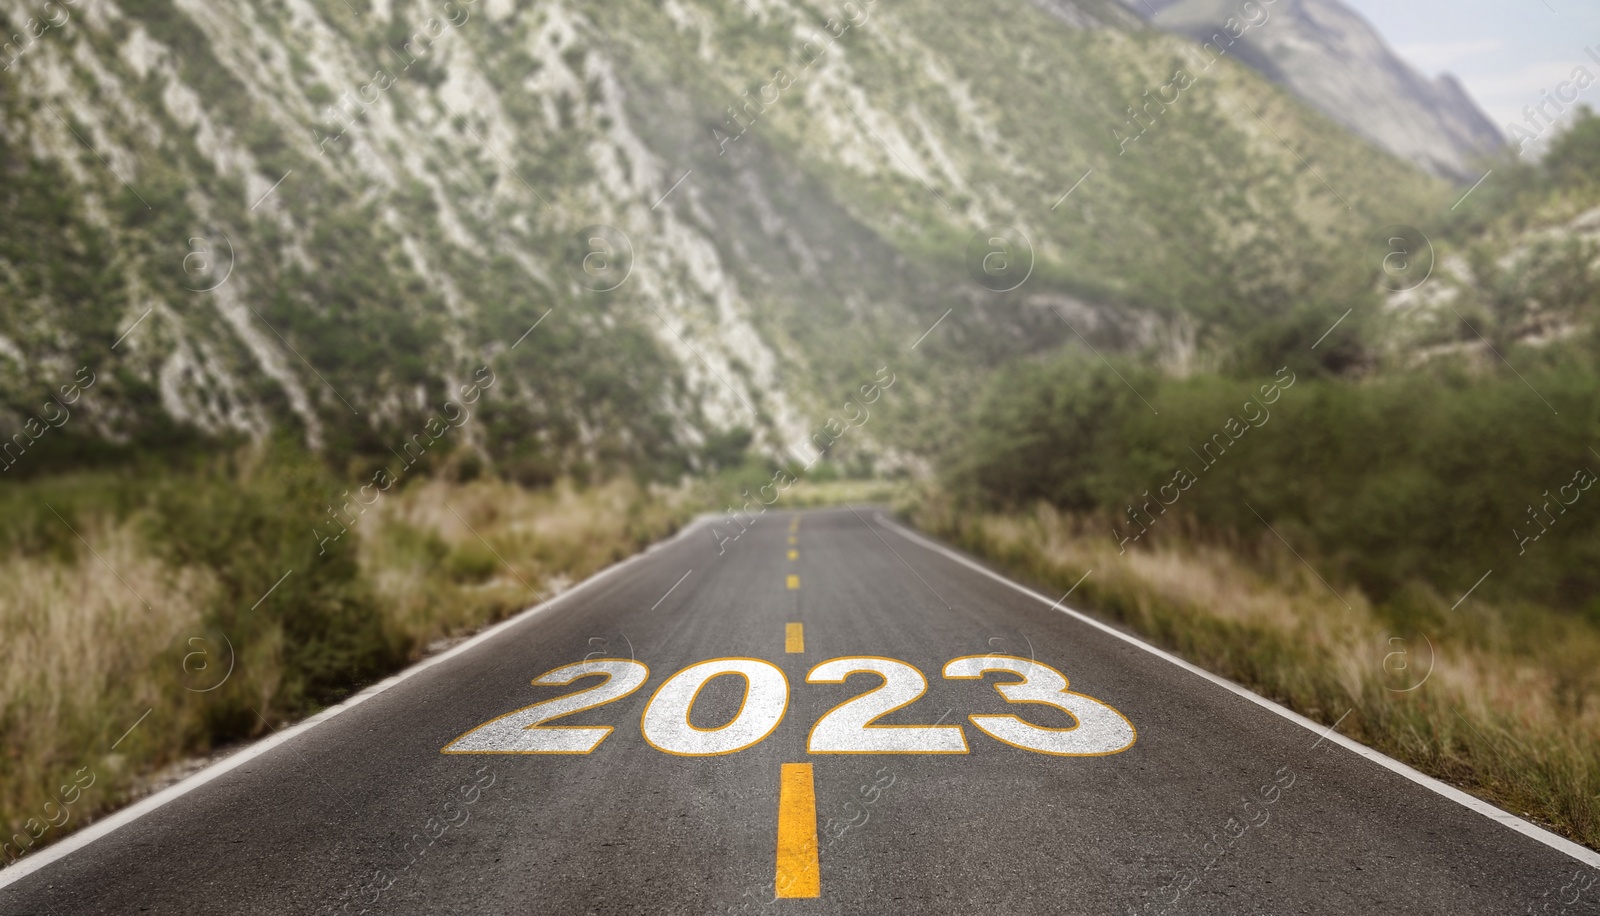 Image of Start of new 2023 year. Asphalt road with numbers